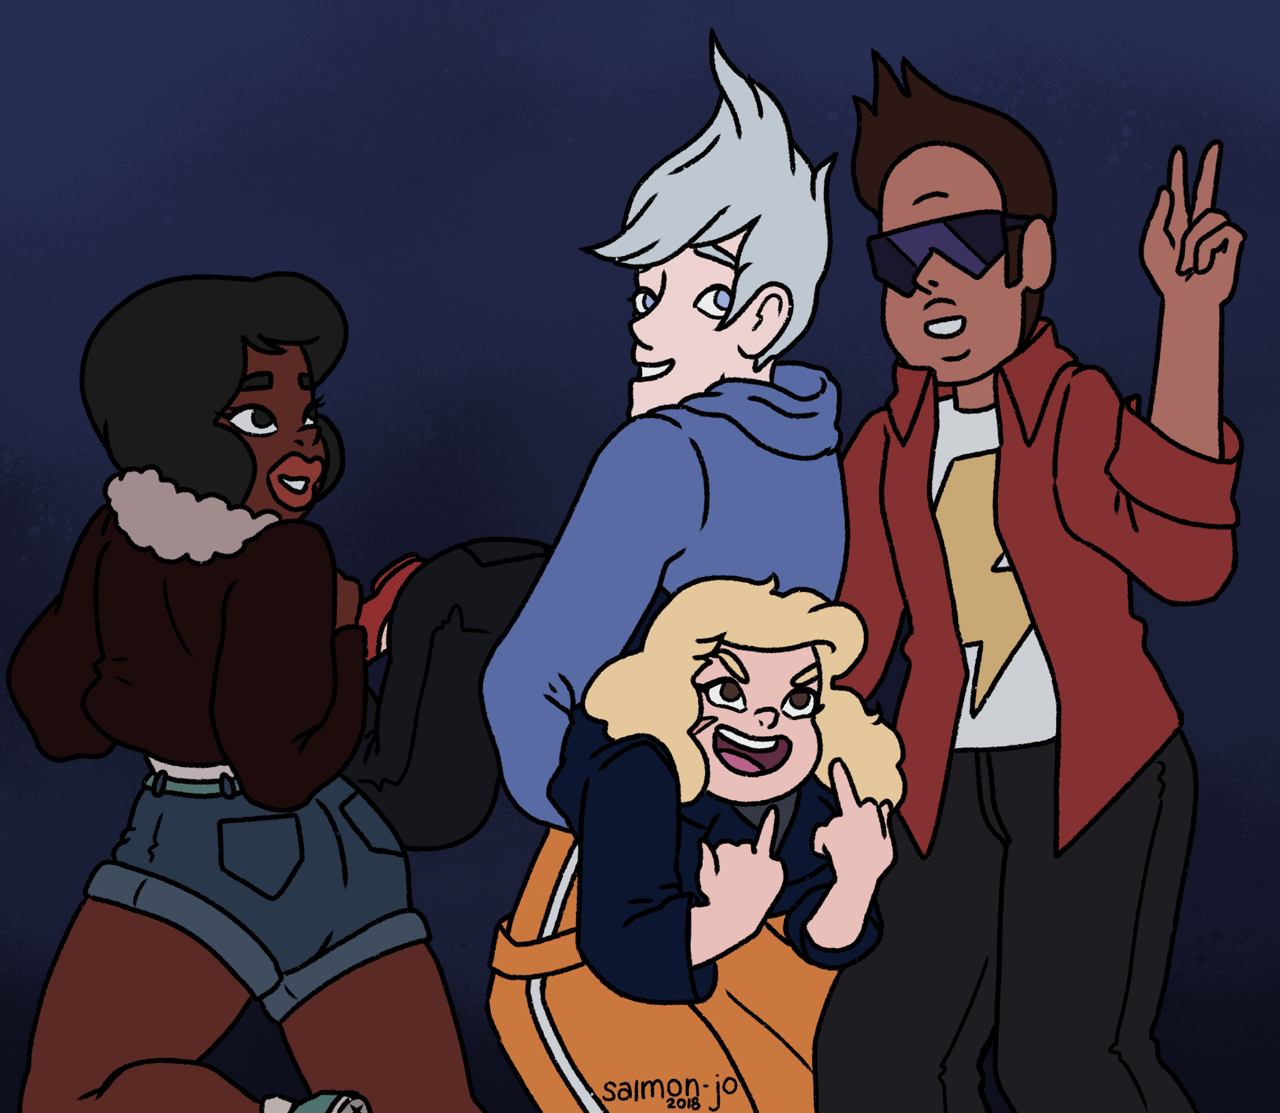 some rock stars causing trouble, they probably egged Marty’s bus or something Sadie has a lot of anger and is Ready To Fight